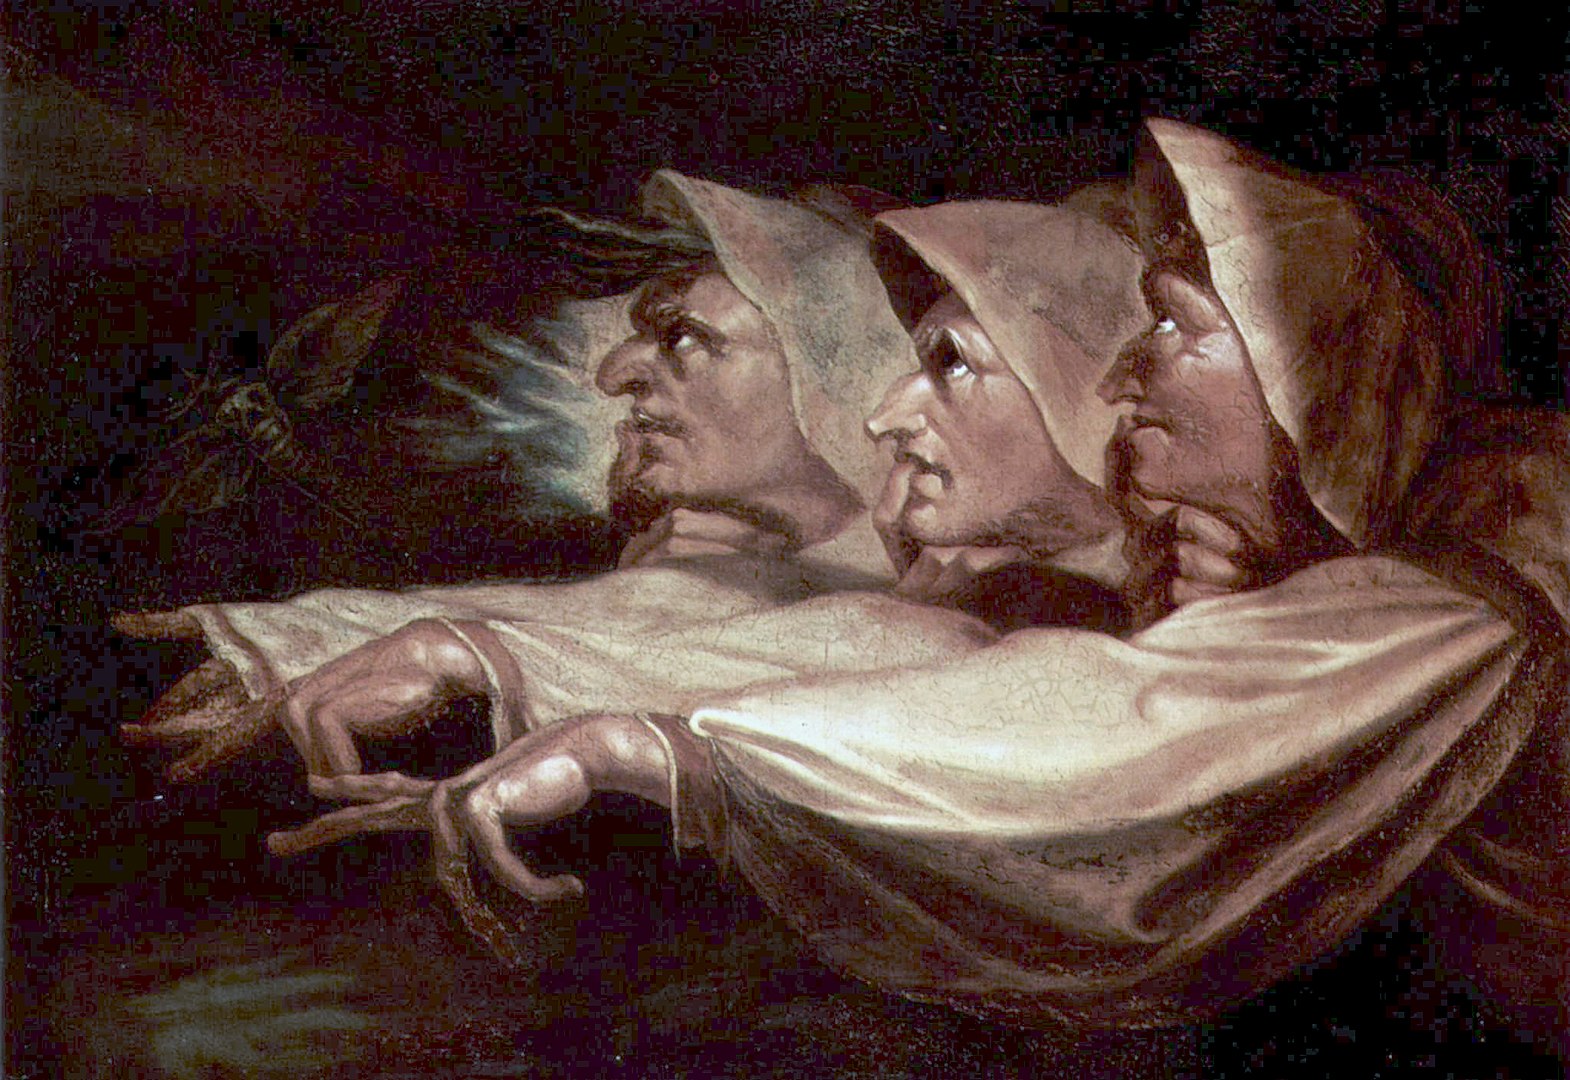 The profiles of three sisters dressed in hooded robes look upwards while pointing ahead with their index fingers.